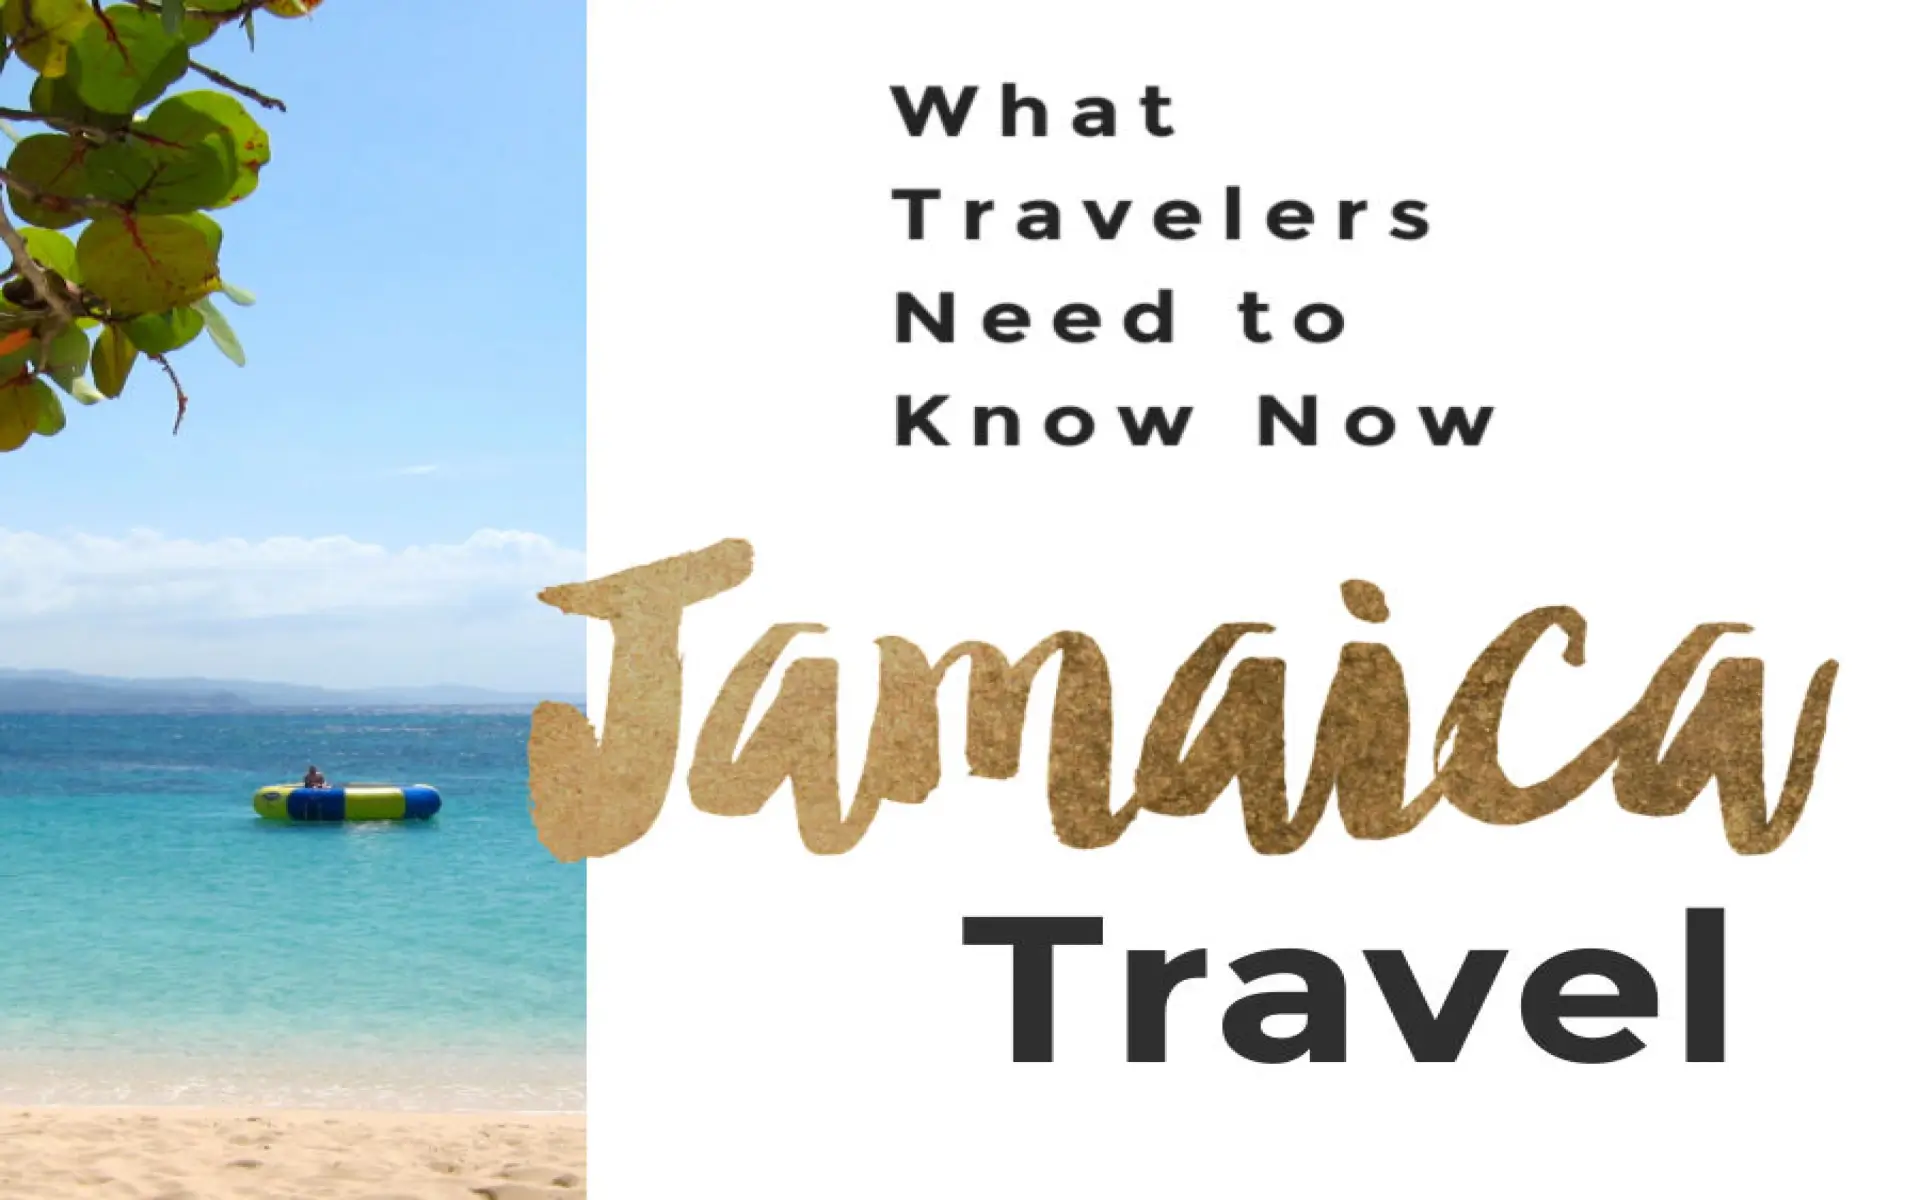 U.S. Issues Level 3 Travel Advisory for Jamaica: What Travelers Should Know